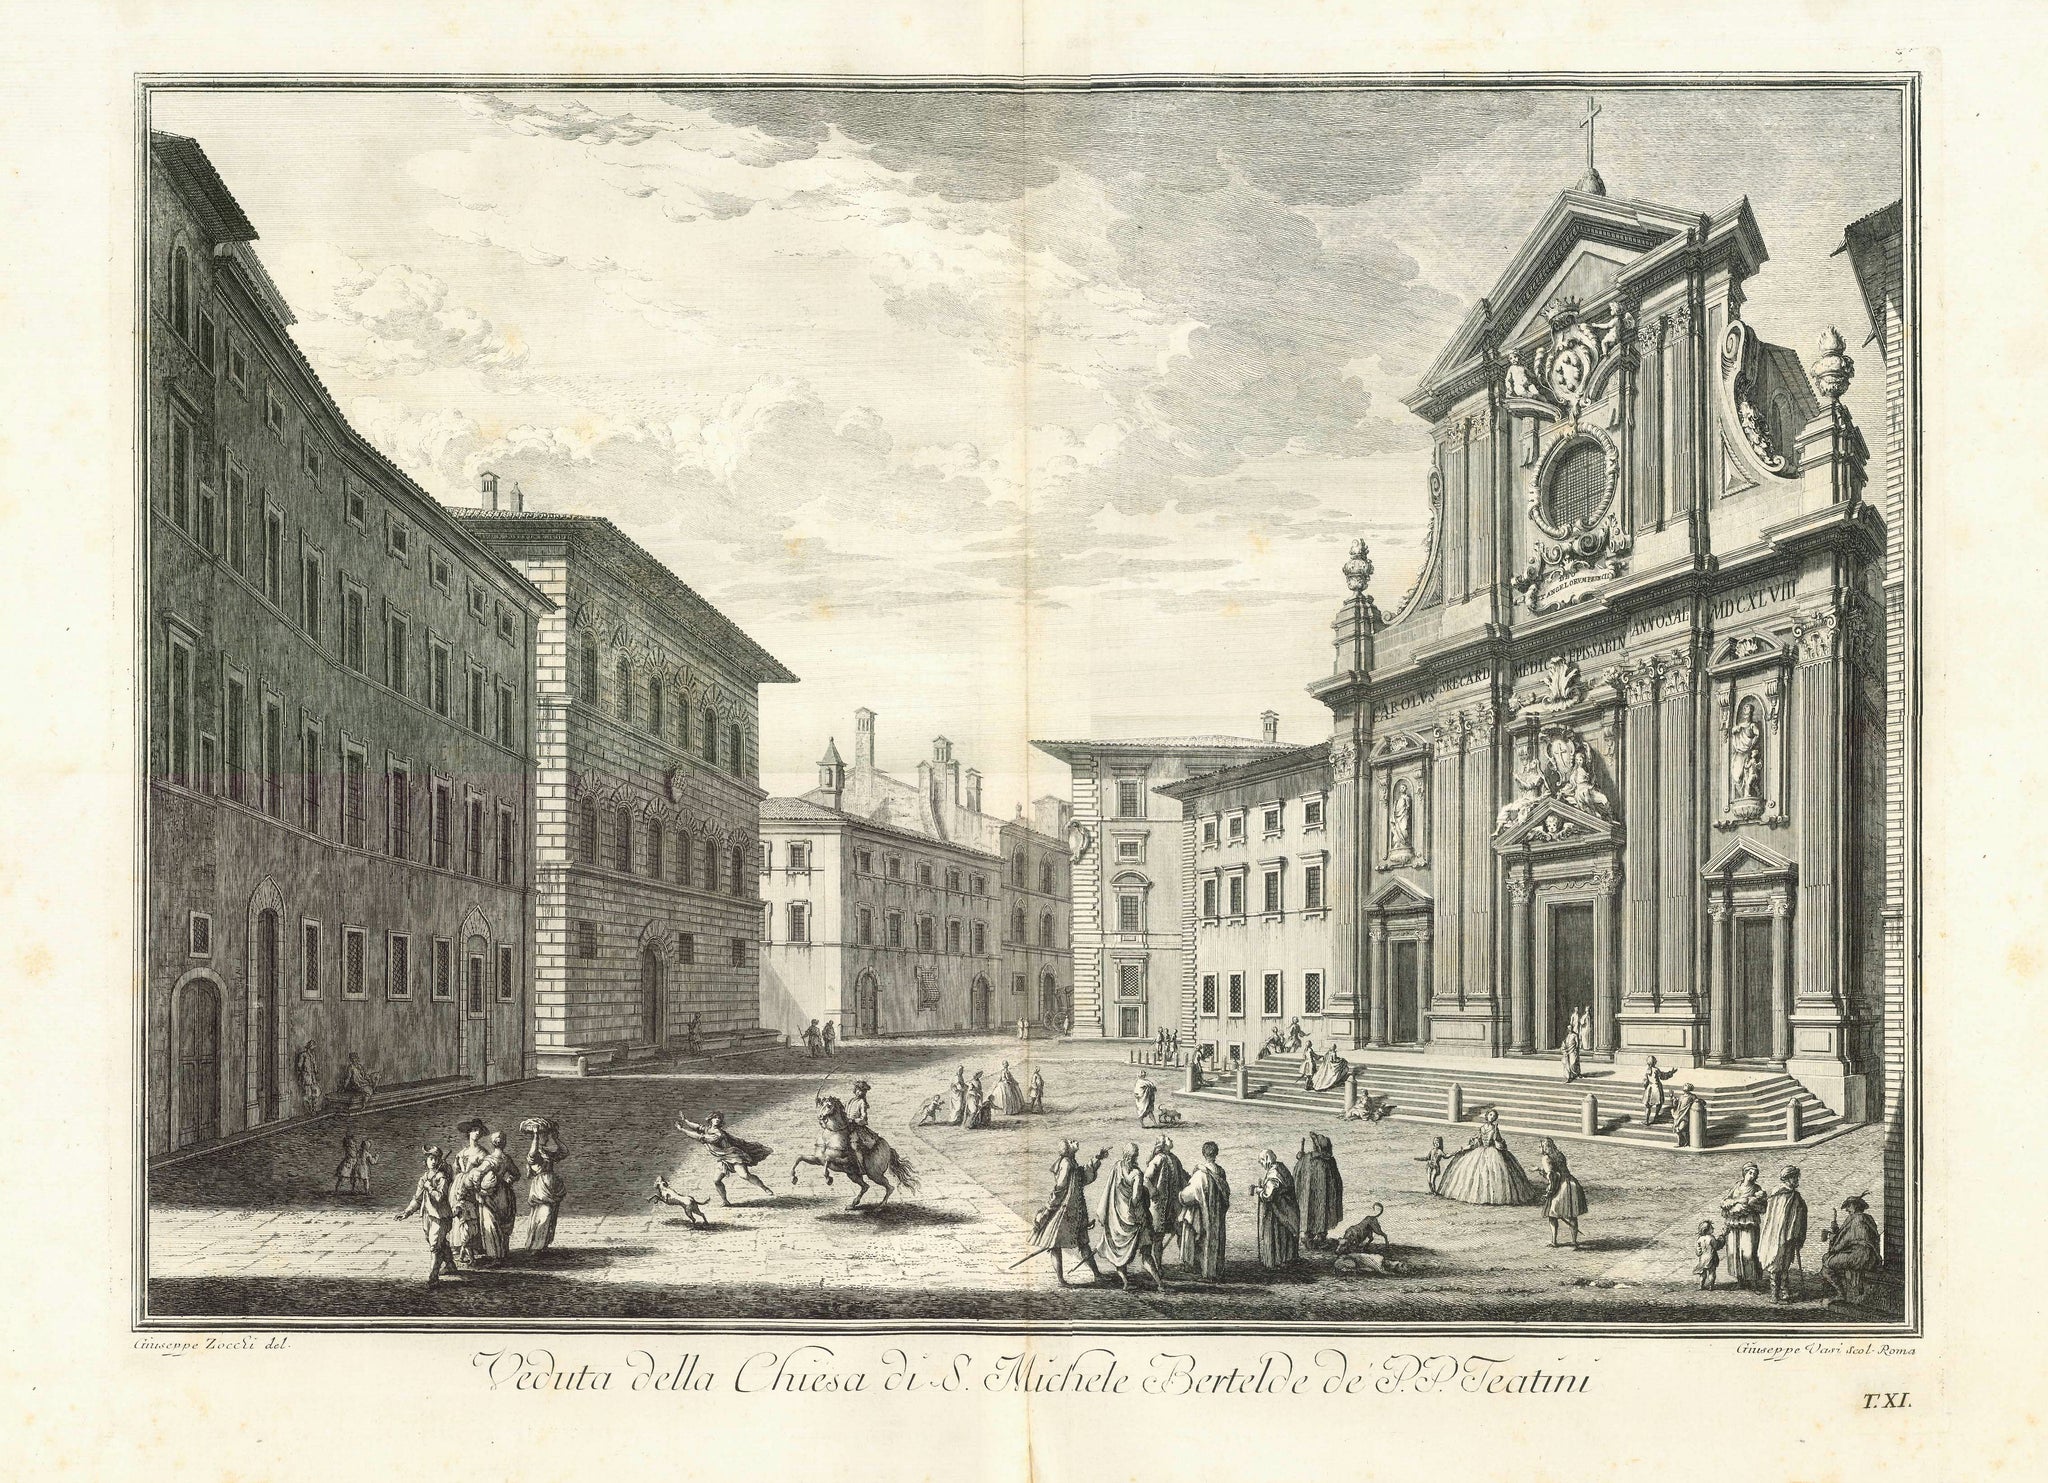 Florence, Zocchi,  "Veduta della Chiesa di S. Michele Bertelde de P.P. Teatini"  Engraved by Giuseppe Vasu Scol. Roma.  Image: 46 x 66 cm ( 18.1 x 25.9" ) Page size: 59 x 80 cm (ca. 23.2 x 31.5")  Fine image. Heavy Paper.  In the lower margin near the centerfold are repaired tears. Minor signs of age and use in margins.  Copper Engravings of Florence after Giuseppe Zocchi